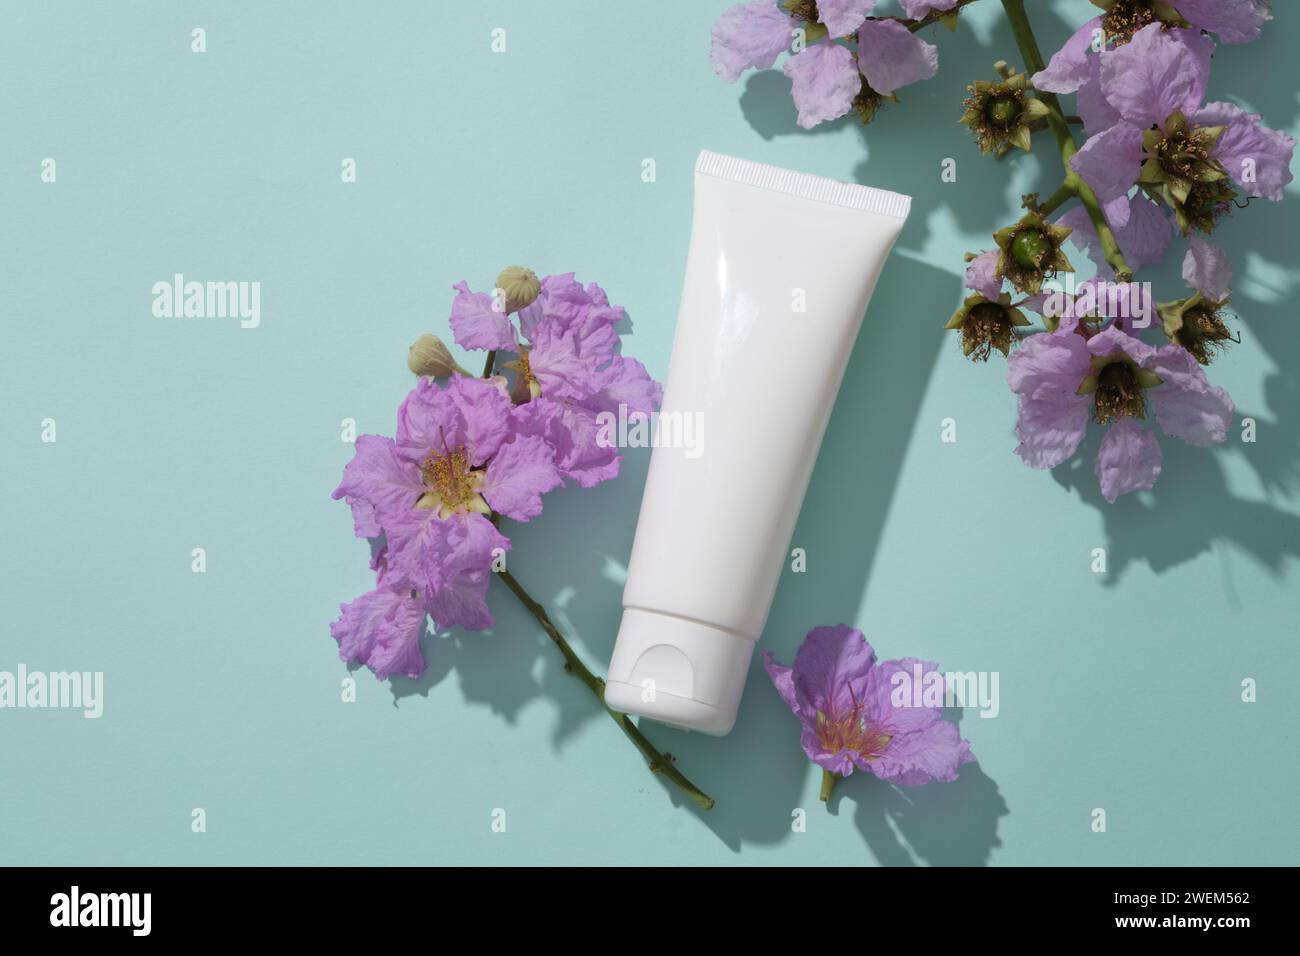 Cosmetic brand mockup on pastel background, surrounded by beauty purple flower. Plastic bottle unbranded for skin care. Packaging for cream, lotion, g Stock Photo